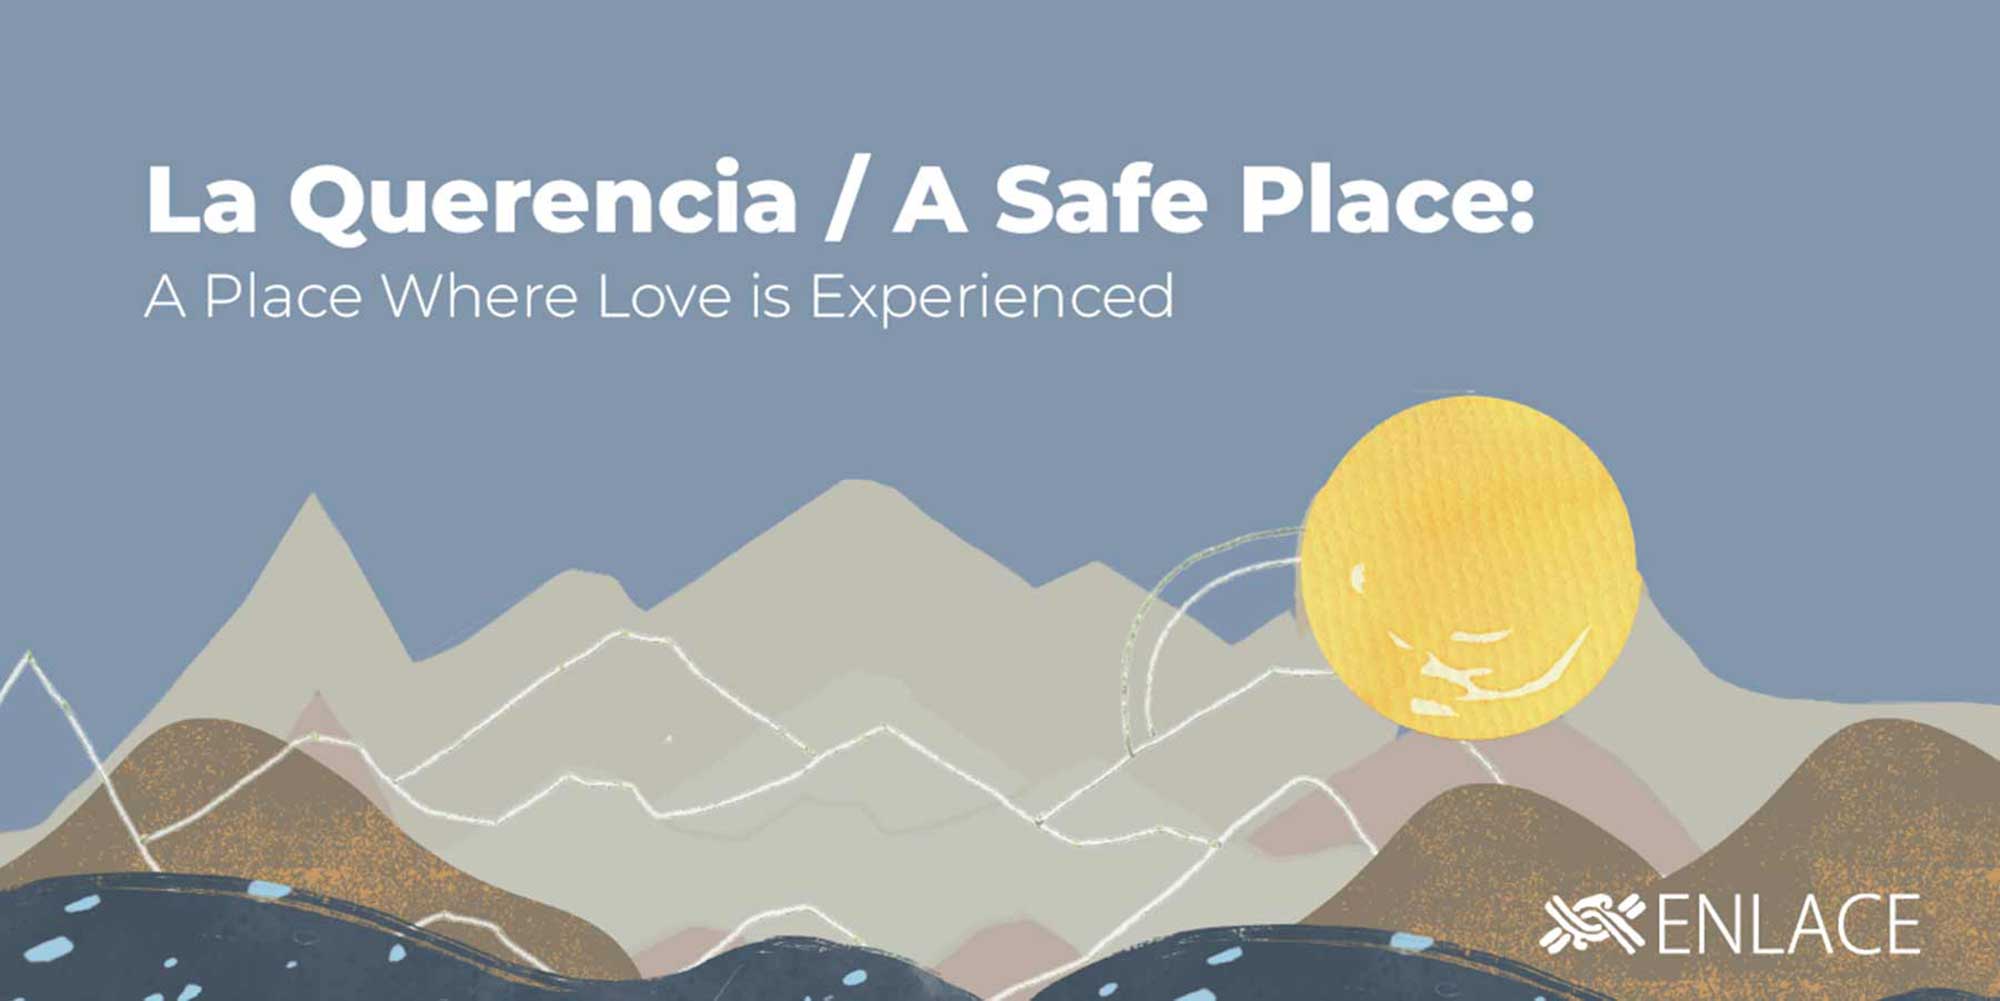 LA QUERENCIA / A SAFE PLACE: A PLACE WHERE LOVE IS EXPERIENCED